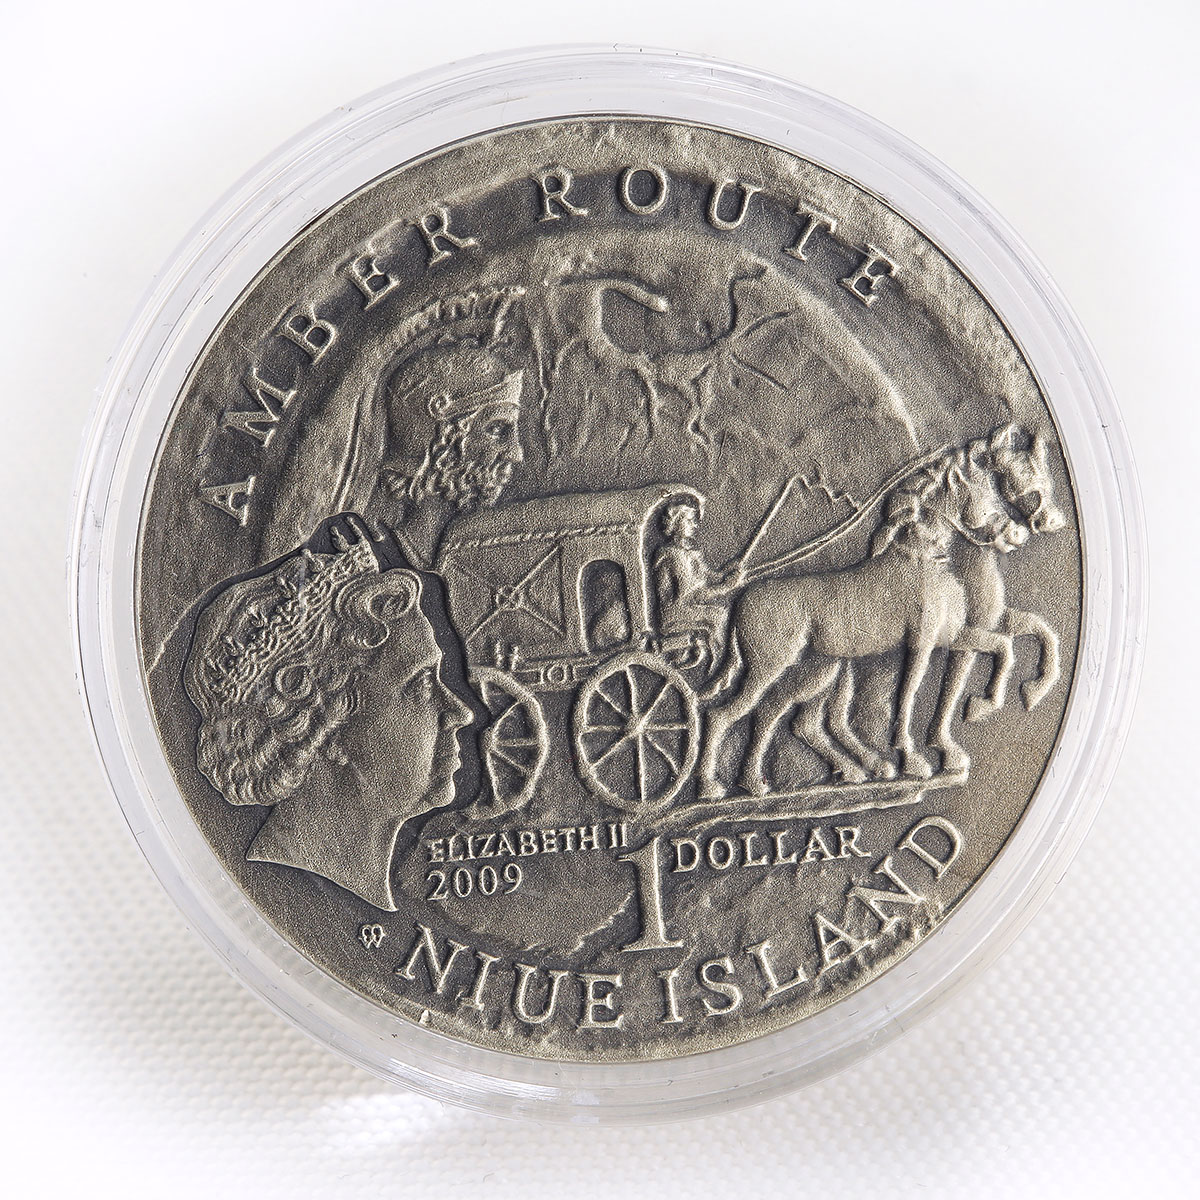 Niue 1 dollar Wroclaw Amber Route series Poland silver coin 2009